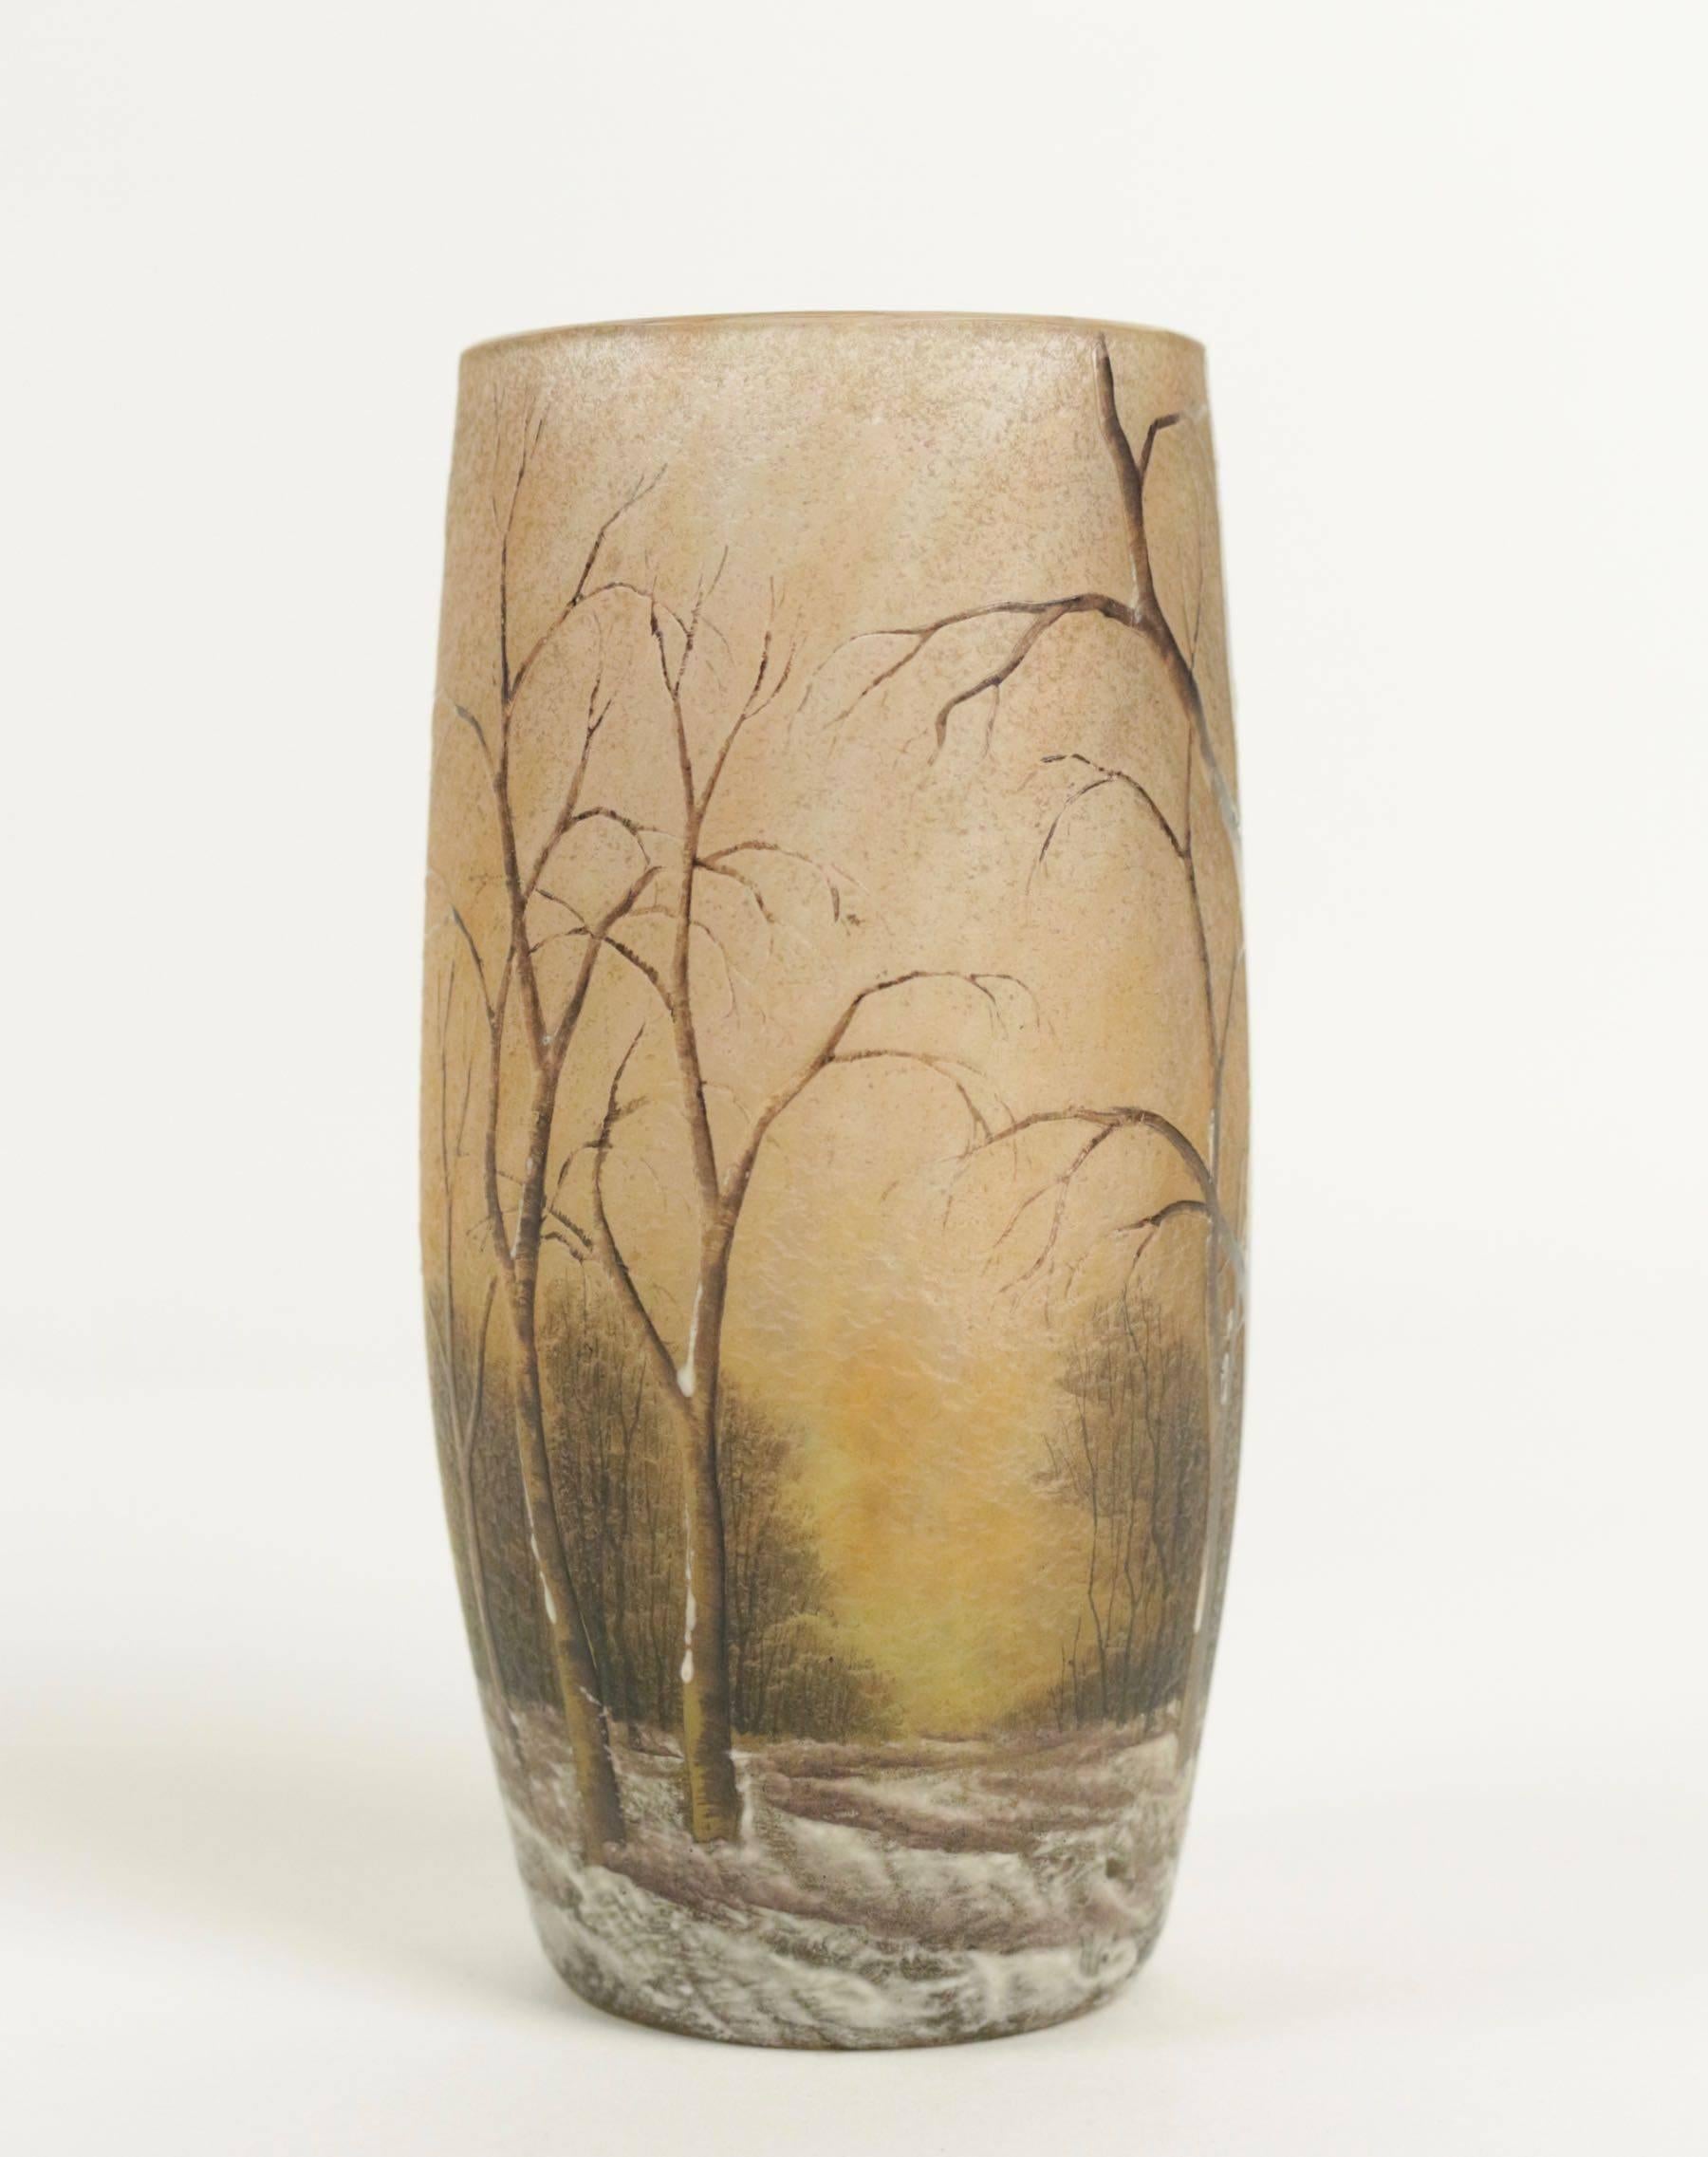 An enameled glass 'winter landscape' vase.
Daum cameo and enameled winter scene vase.
Daum vase has decoration of barren trees rising from snow covered ground against a mottled orange and yellow background. Trees are nicely enameled in shades of